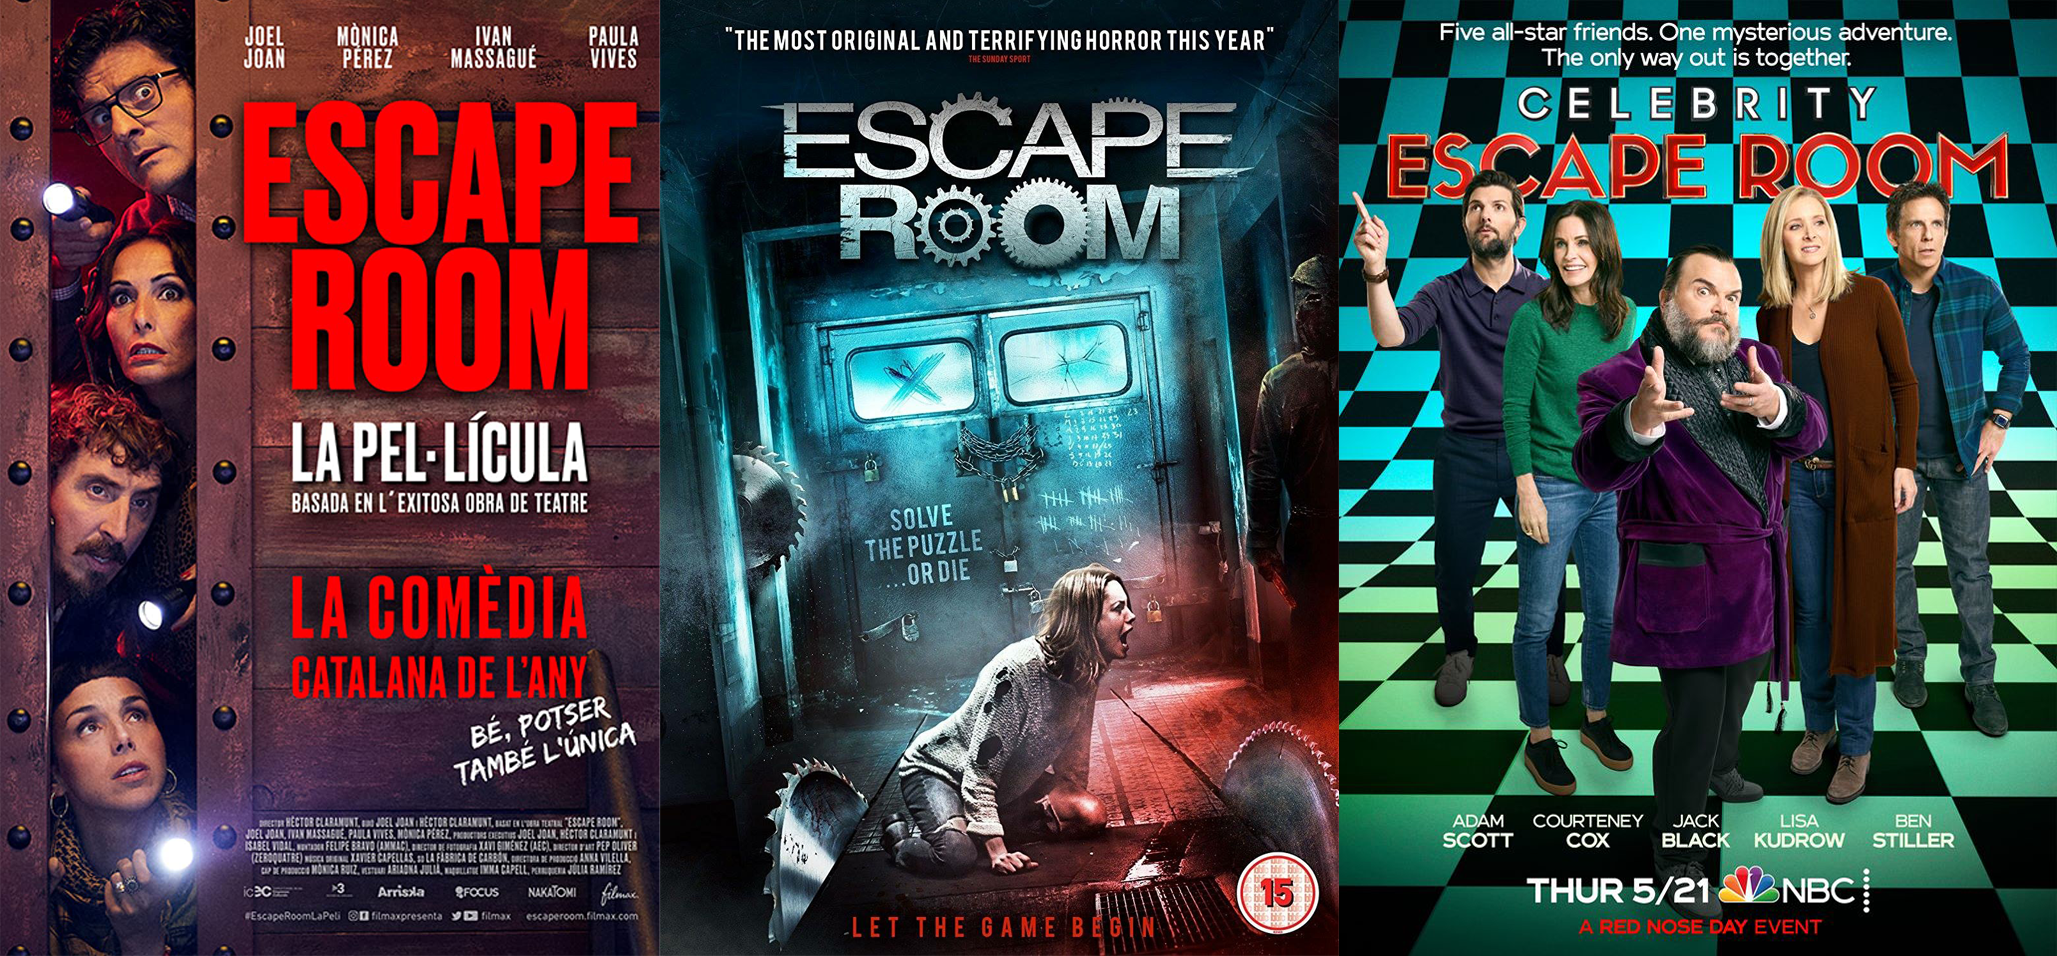 Fans are all reacting the same way to Netflix's Escape Room film